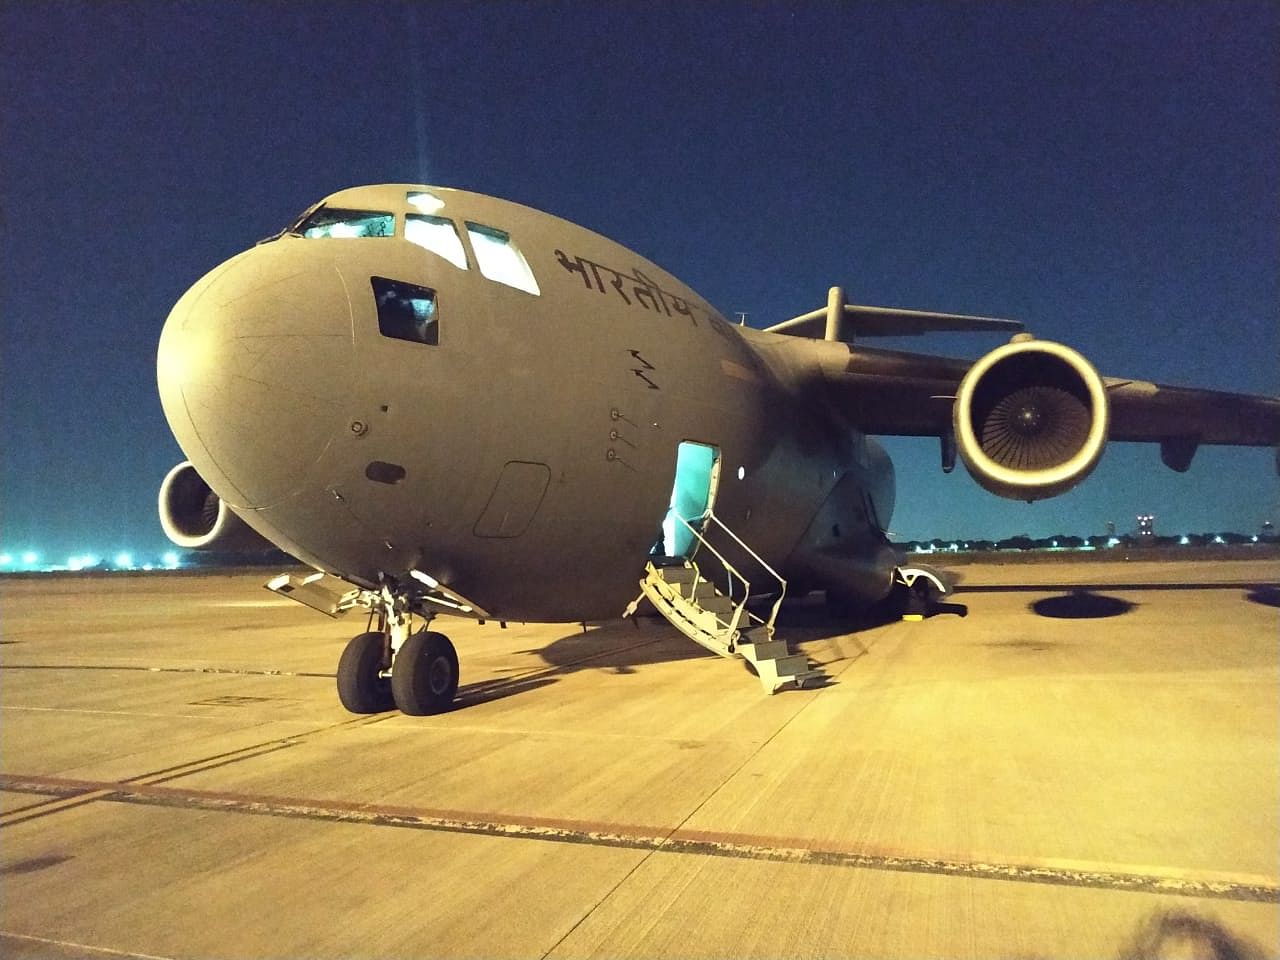 The IAF AC-17 Globemaster that was sent to rescue the Indian nationals from Iran.